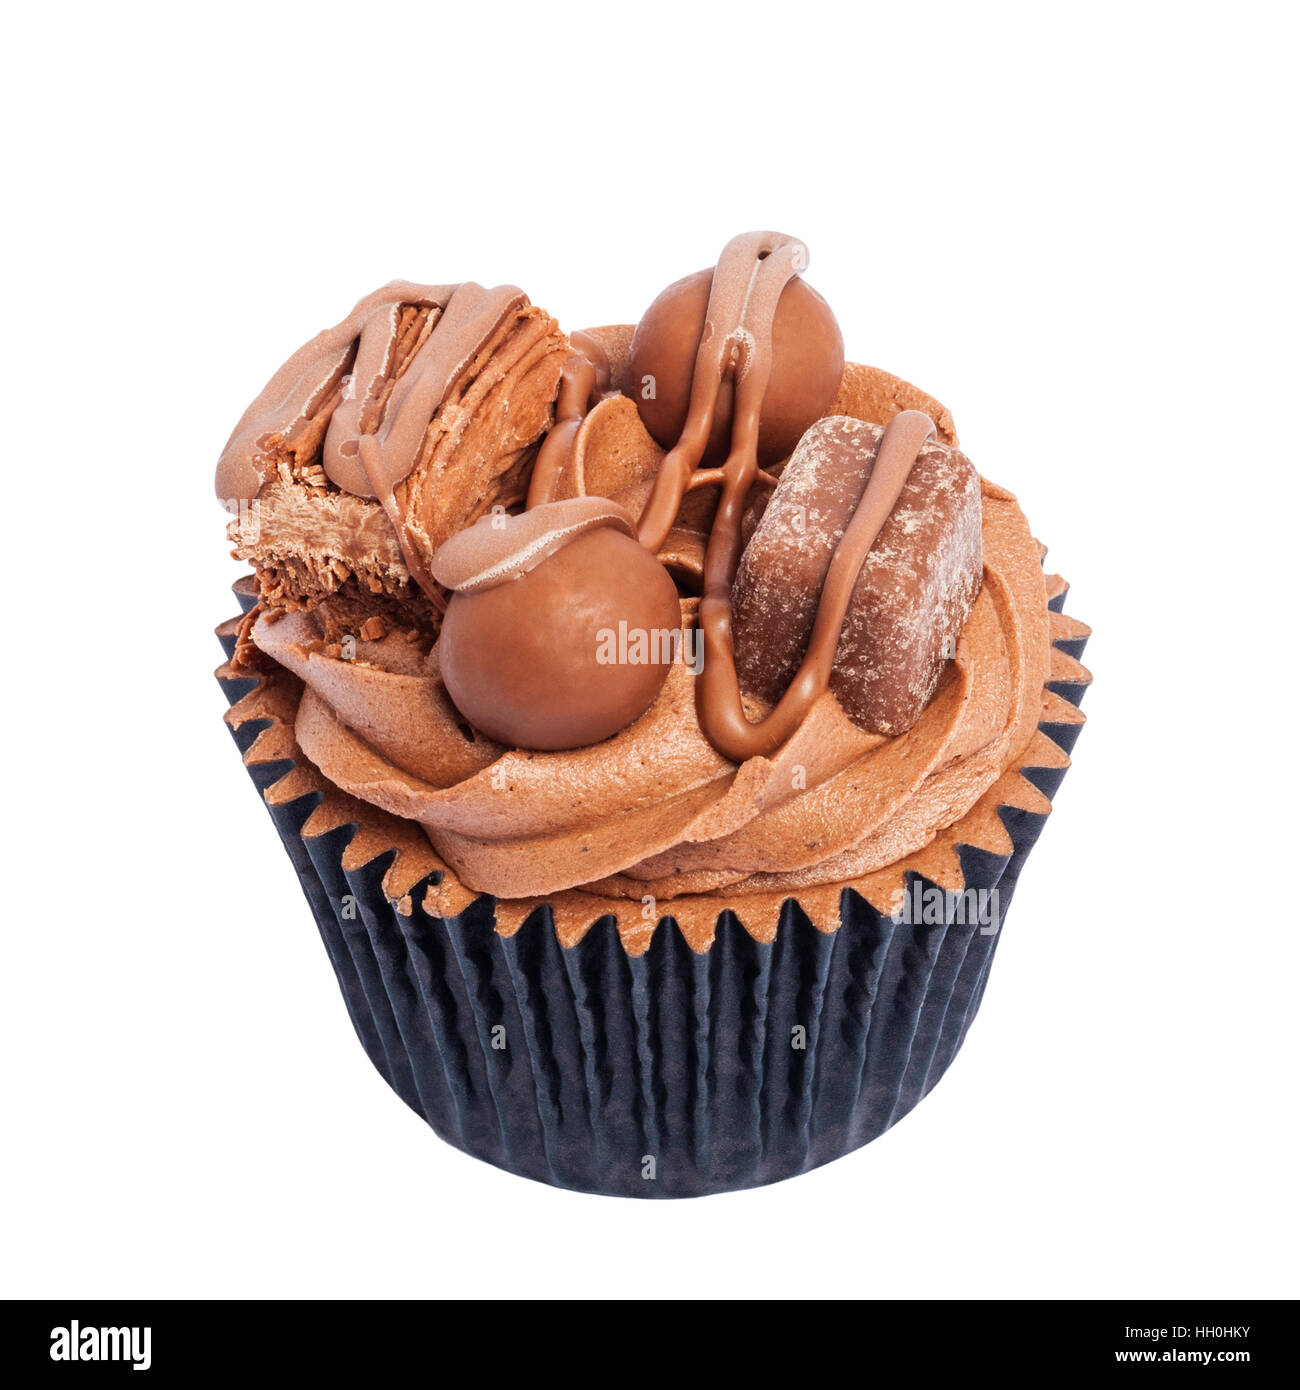 A home made chocolate cupcake on a white background Stock Photo